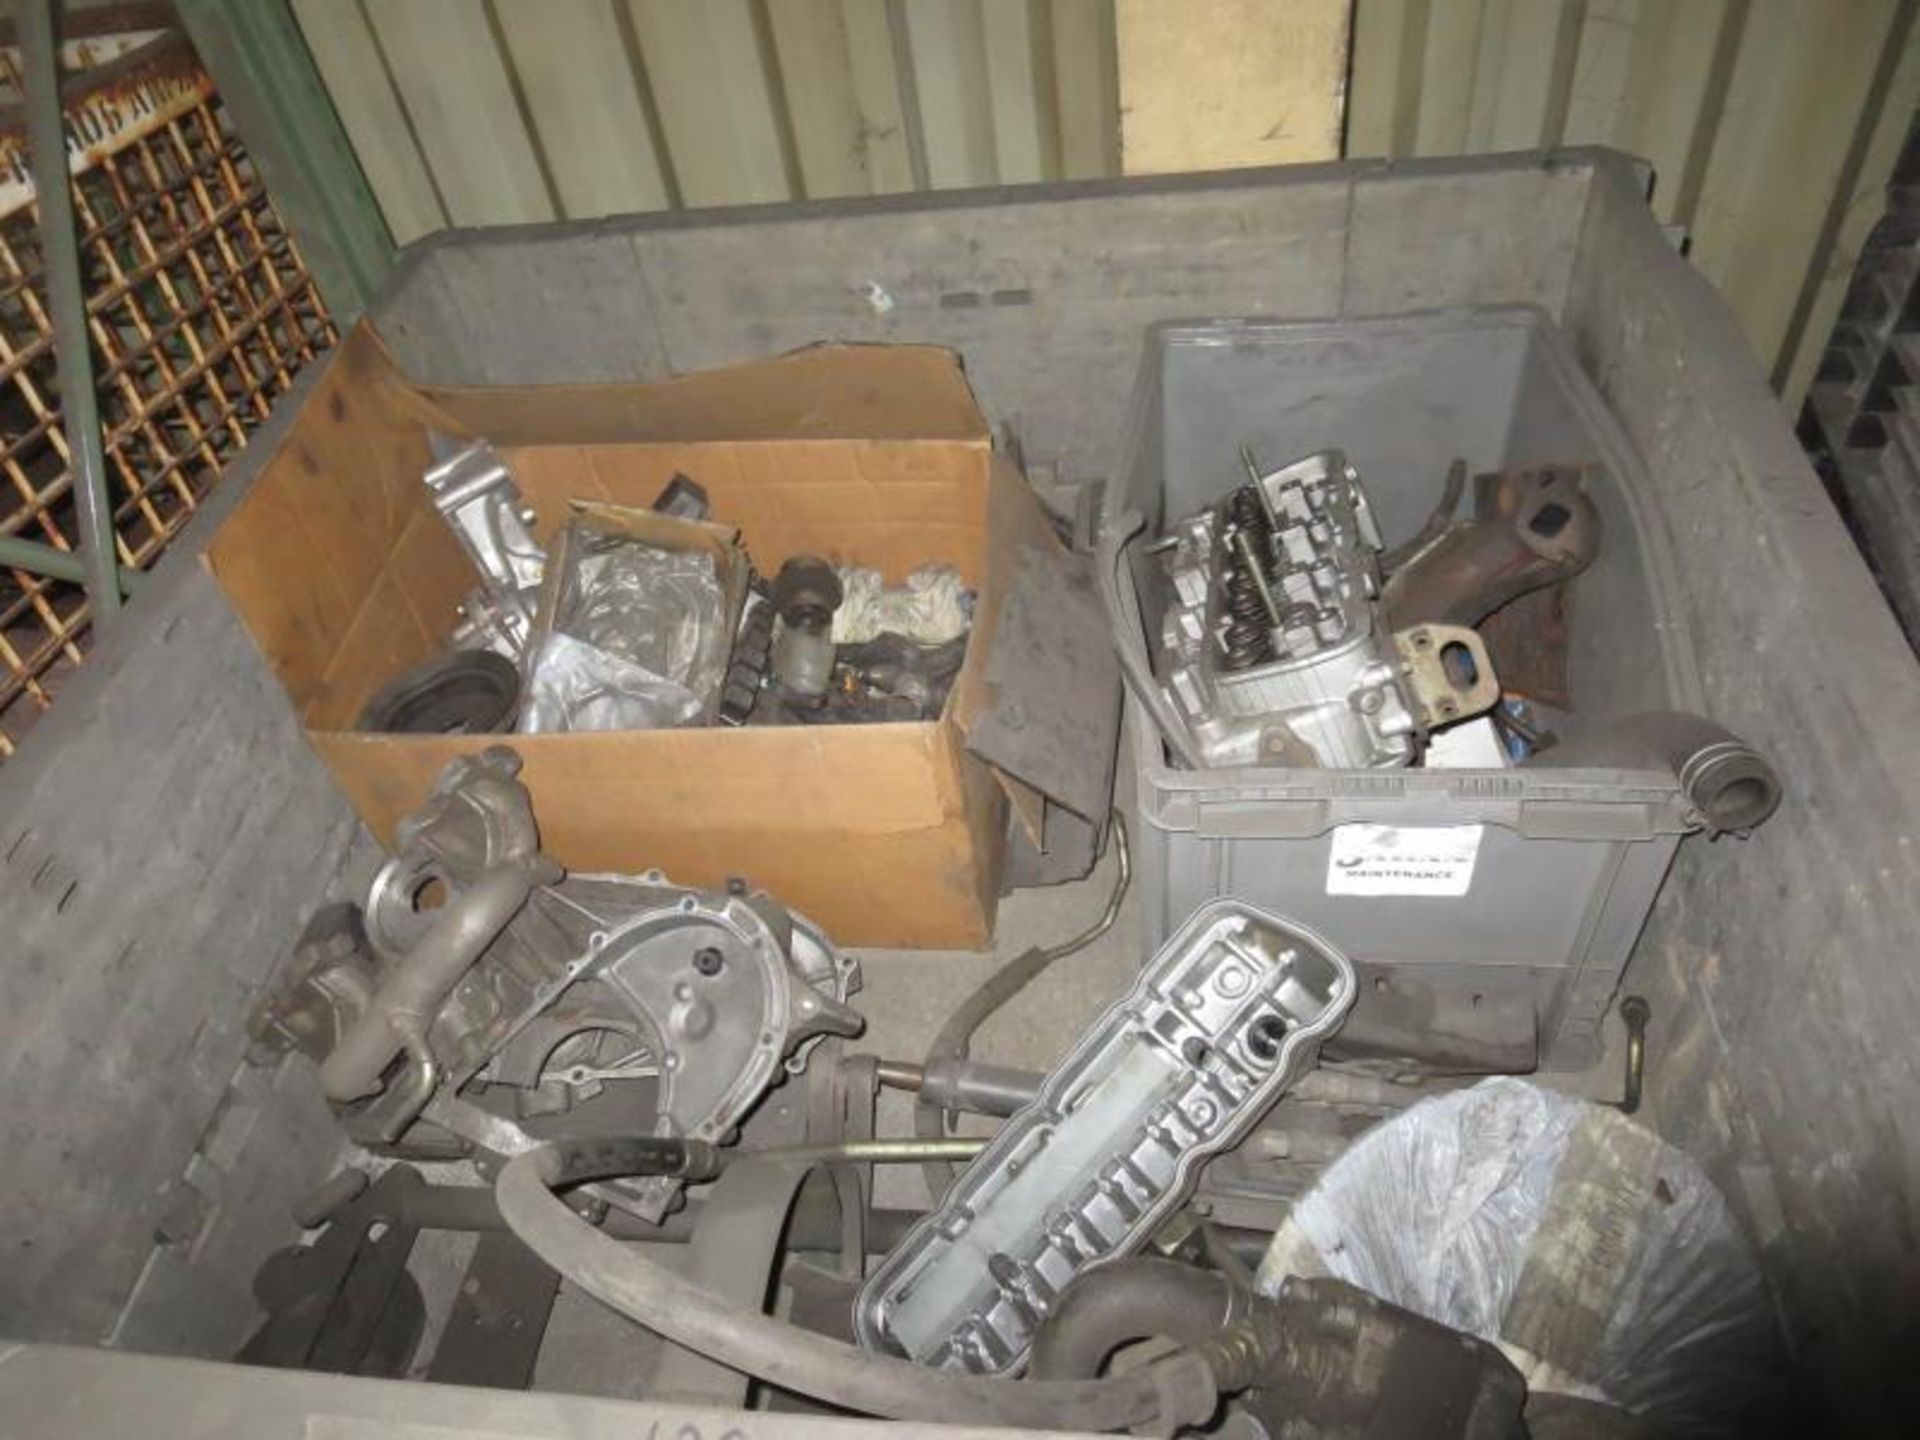 Nissan Forklift Parts. Lot (2) Totes, Engine parts, Seat, assorted plastic. Hit # 2202951. Bldg.1. - Image 2 of 2